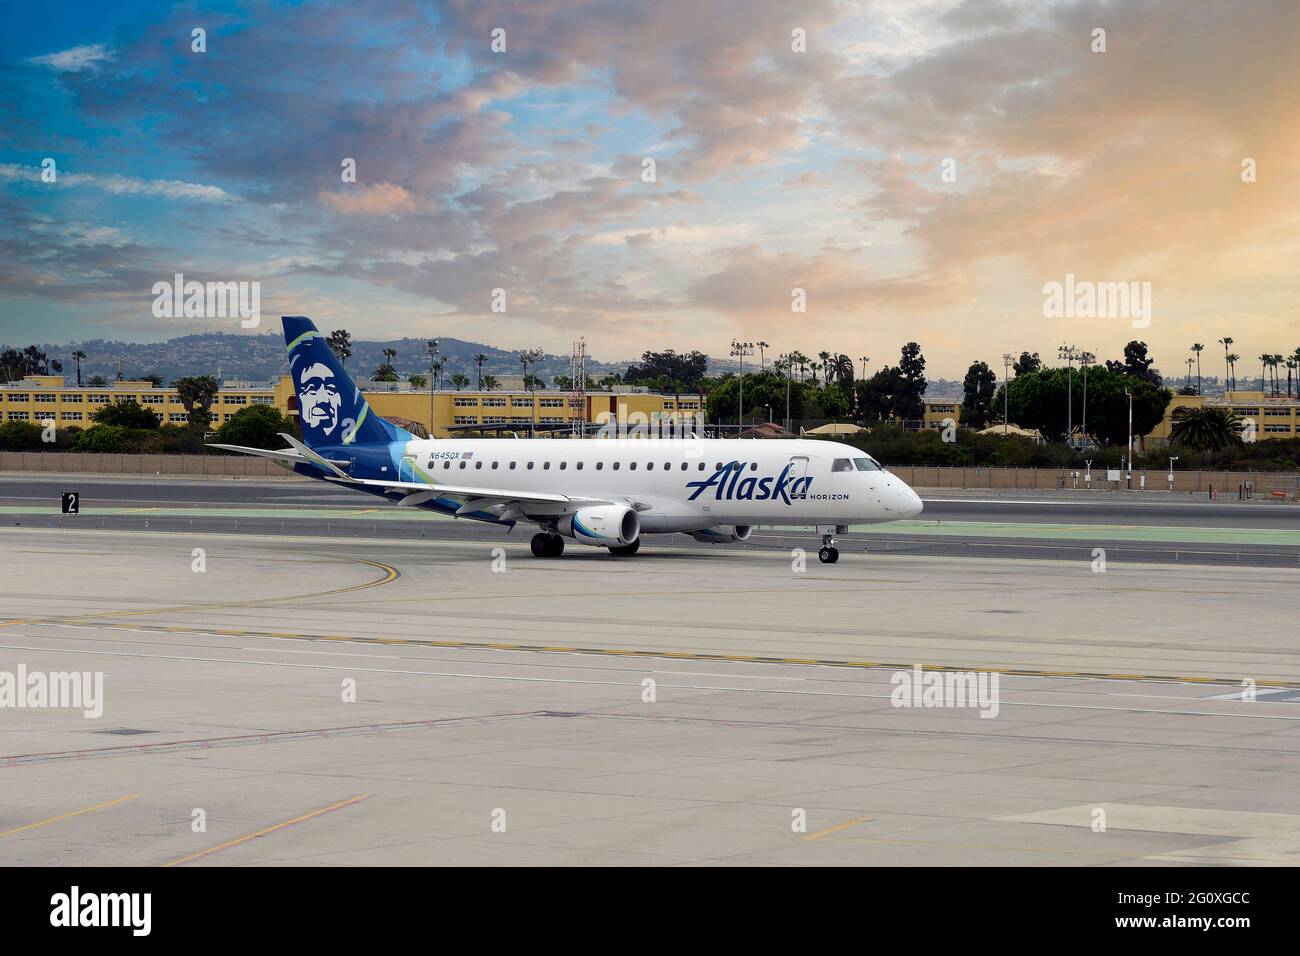 Alaskan Airlines Airbus 320-214 taxiing at San Diego Airport in Southern California Stock Photo